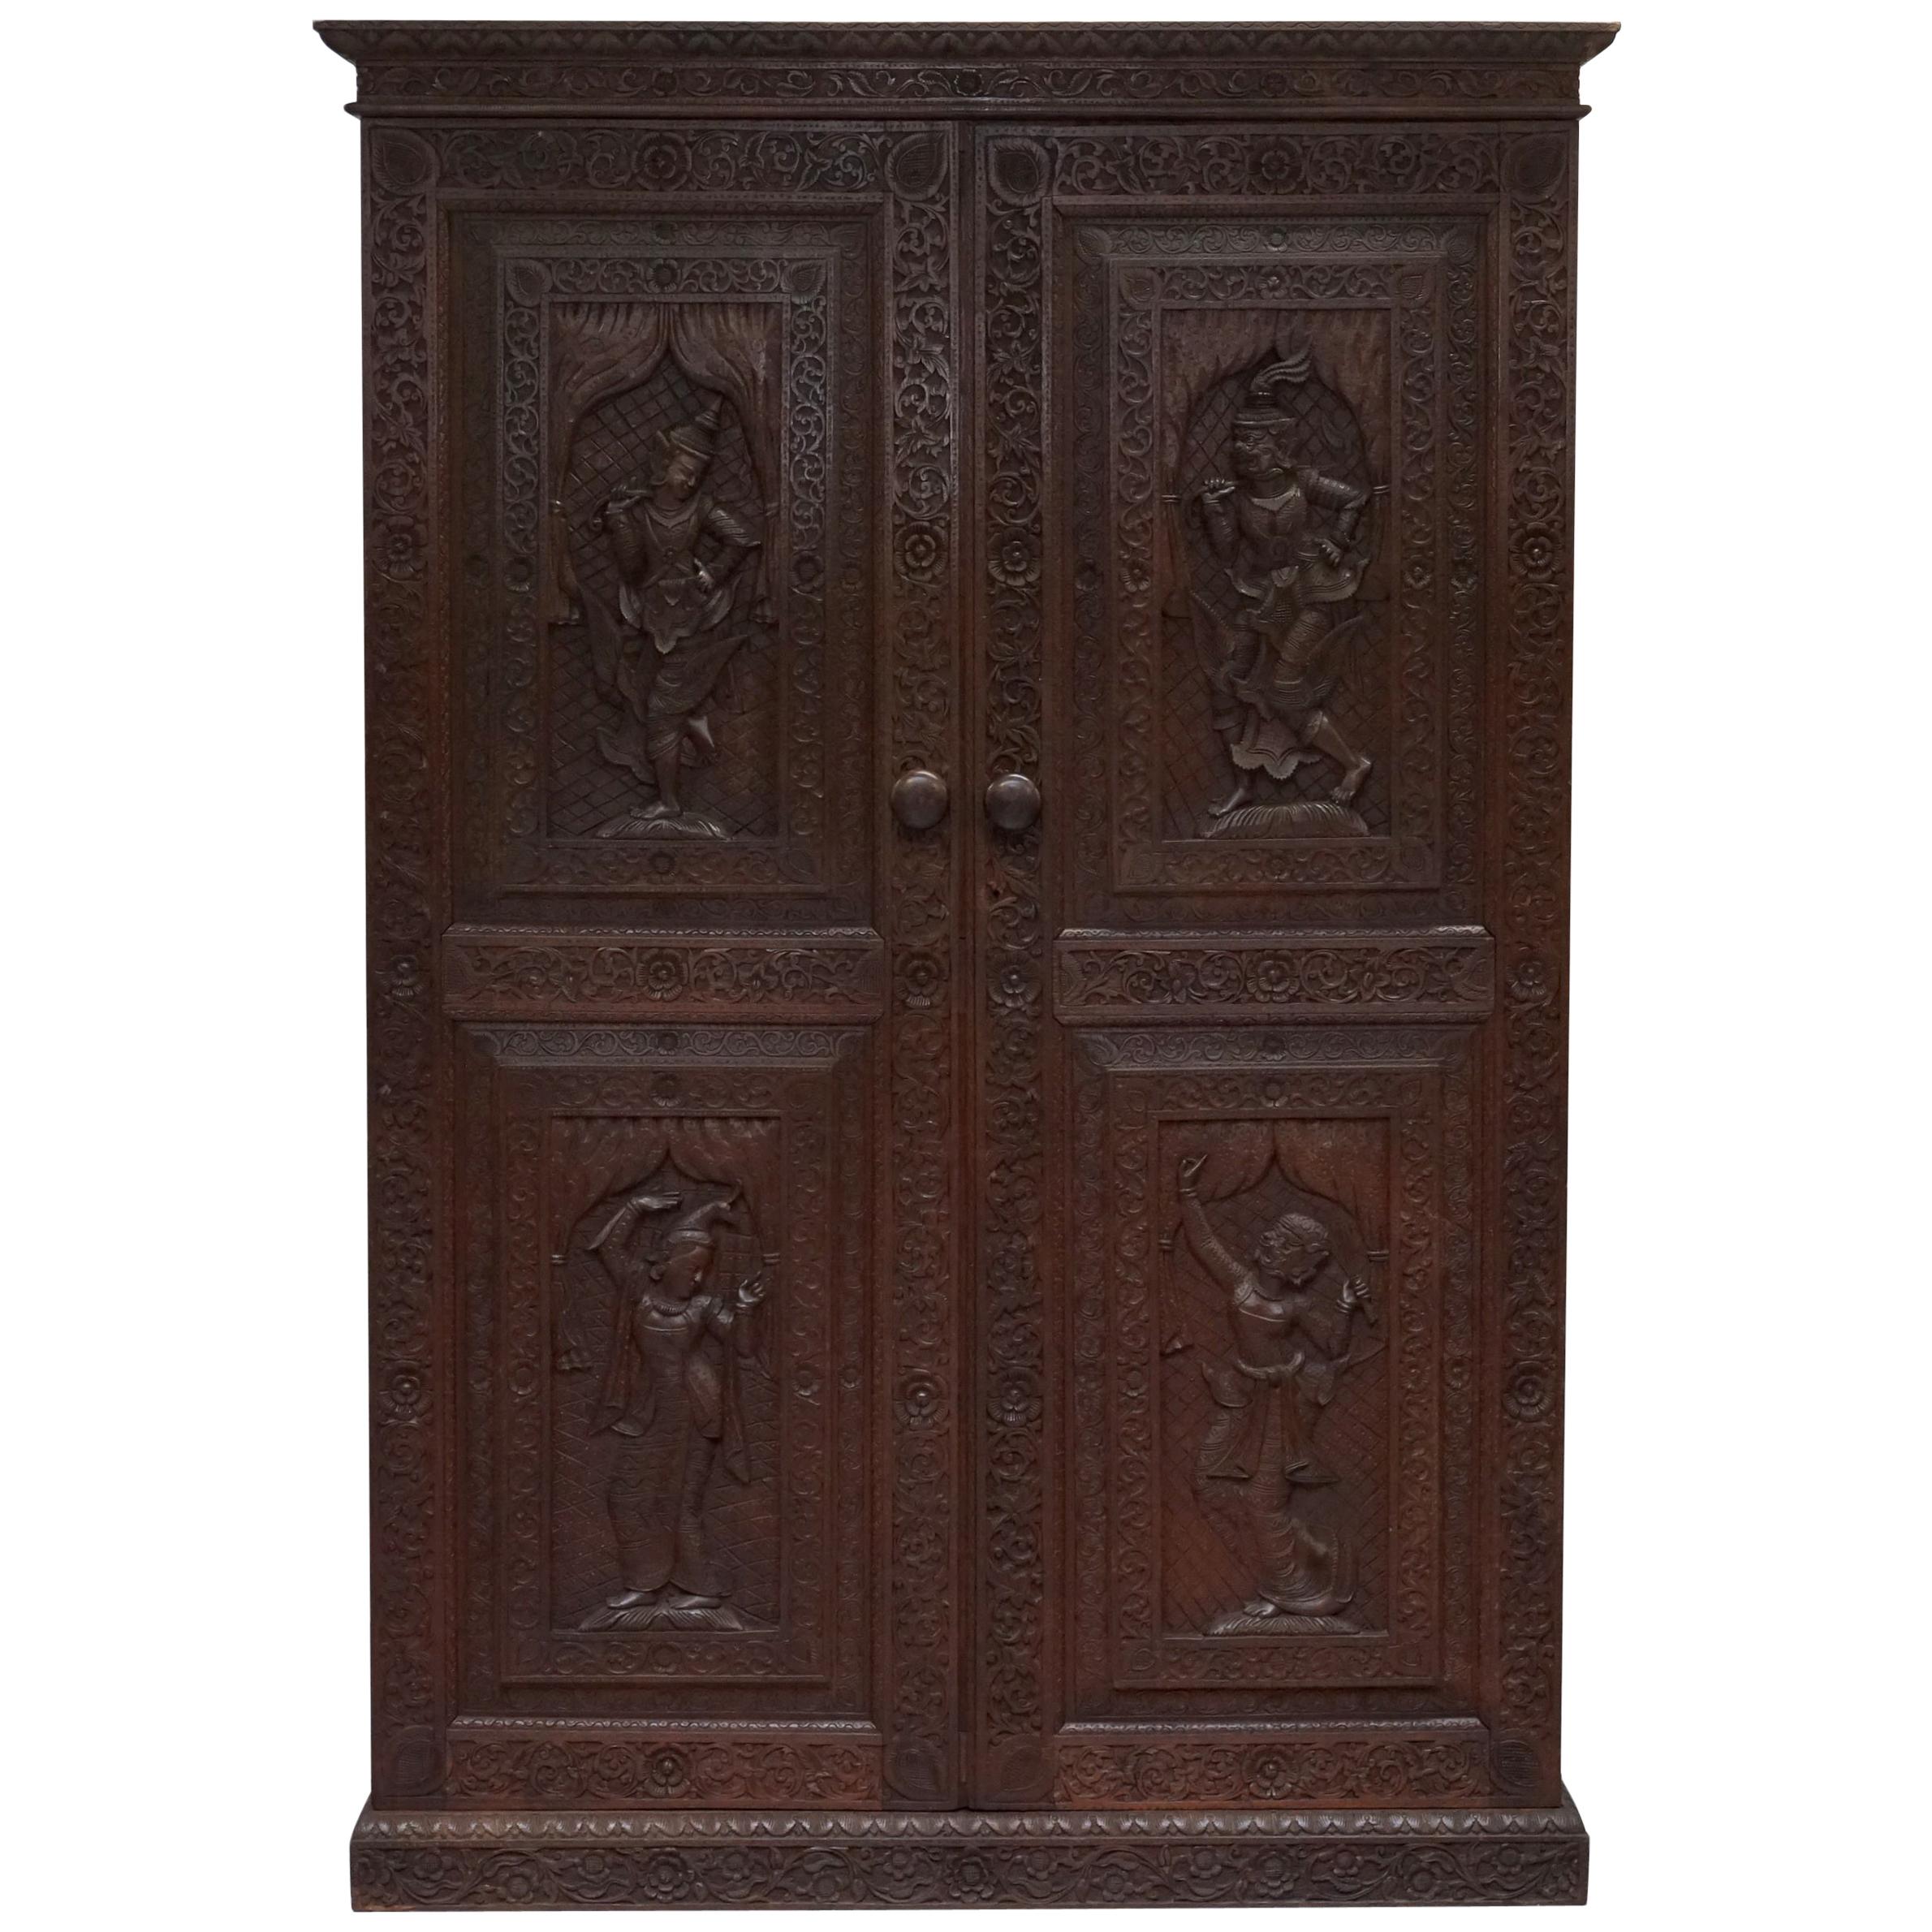 1910 Burmese Anglo Indian Hand Carved Wardrobe Armoire Cupboard Campaign Drawers